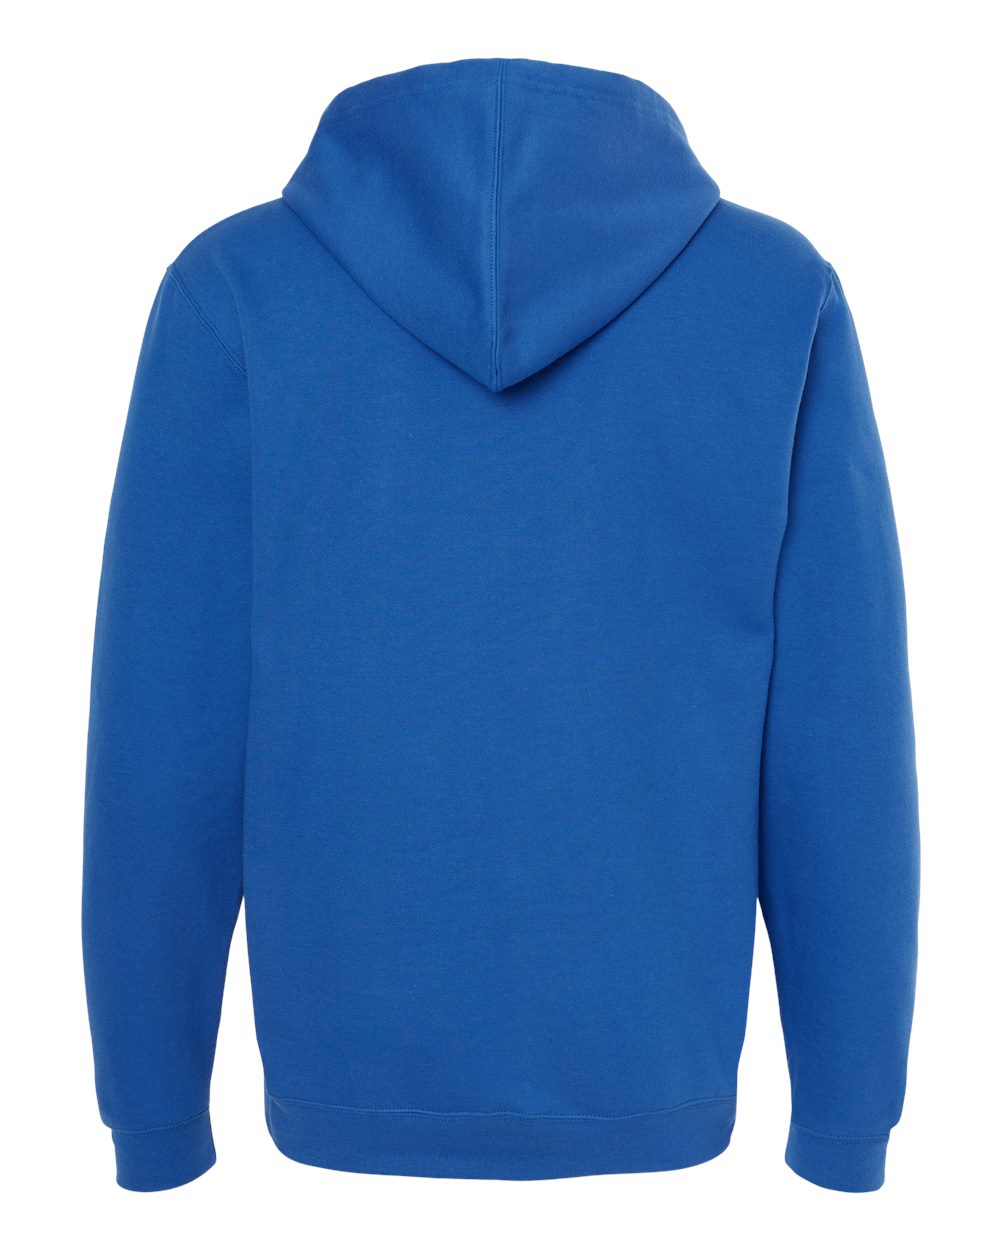 M&O Unisex Pullover Hoodie 3320 #color_Royal